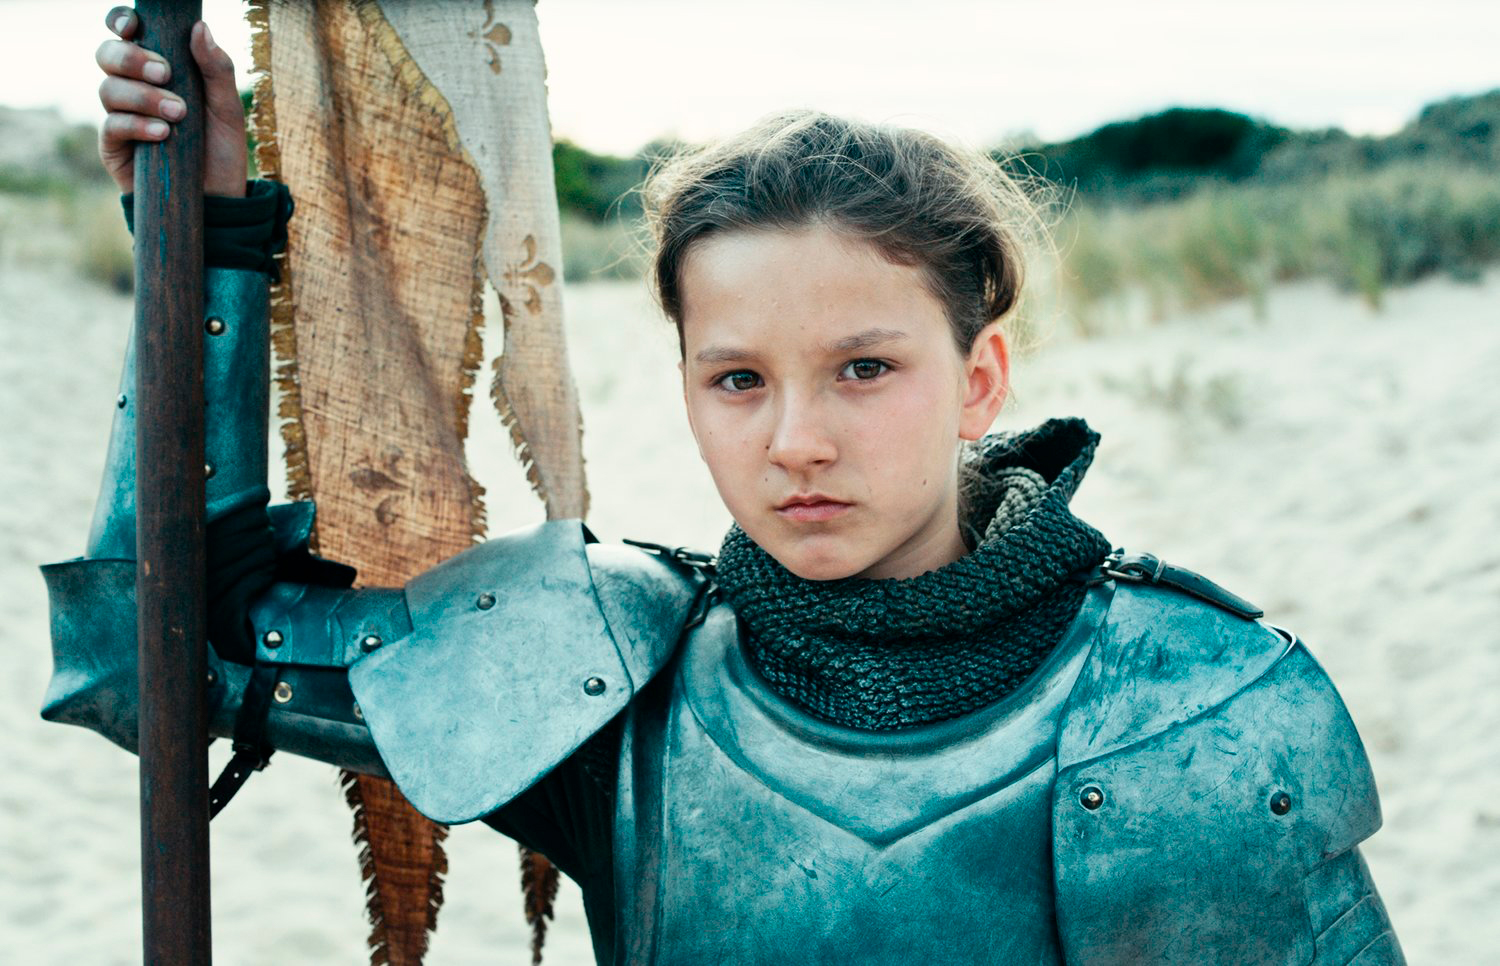  Lisa Leplat Prudhomme as Joan of Arc in knight's armor holding a flag pole on her with her right hand